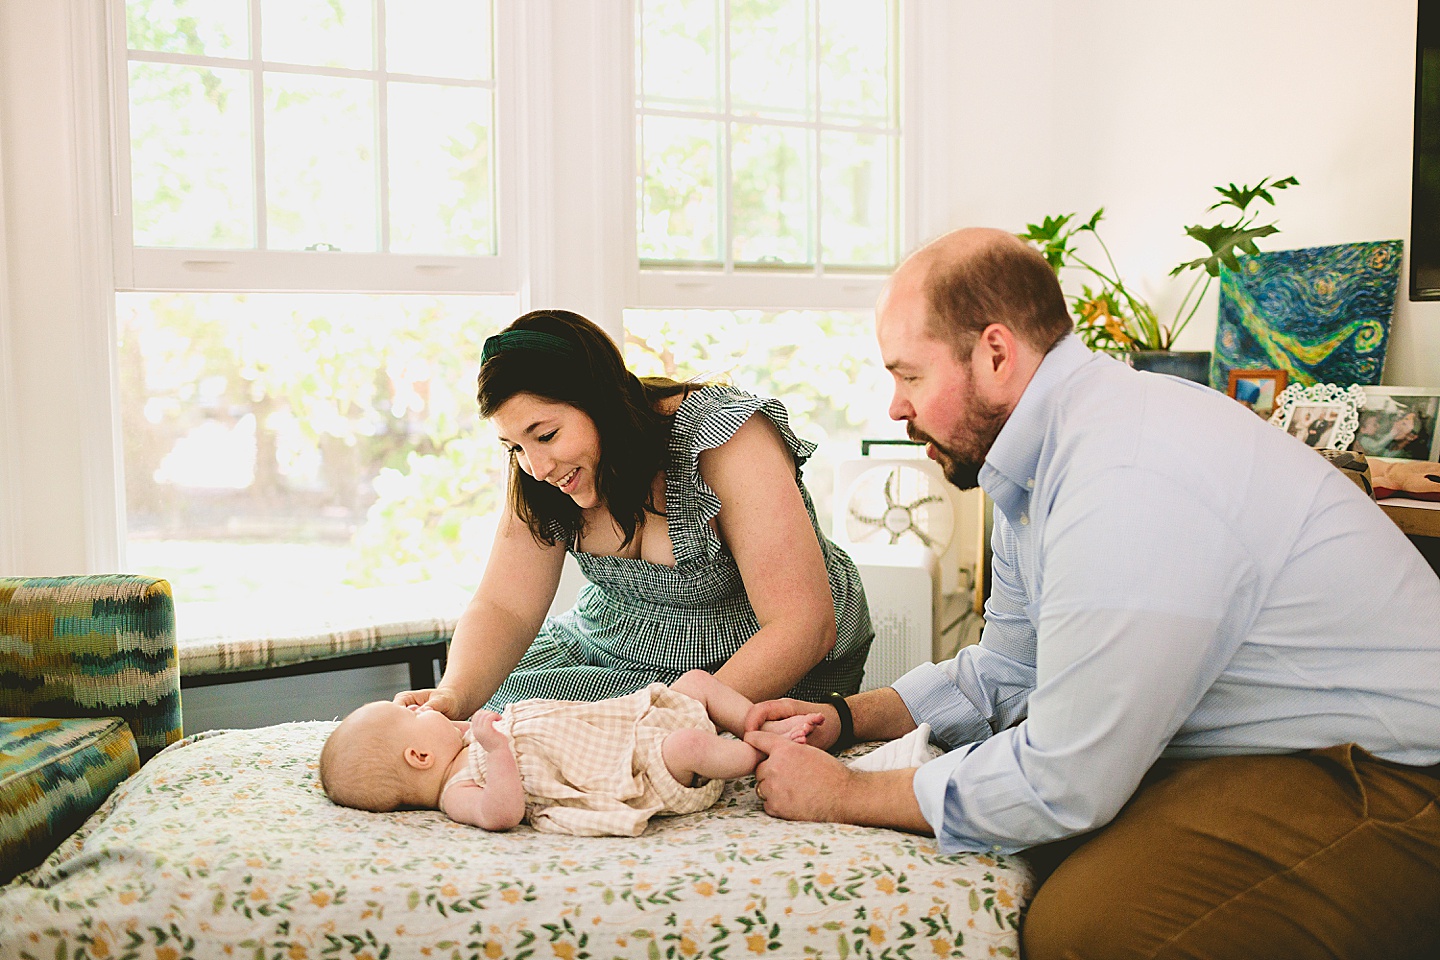 Parents looking and smiling at a baby